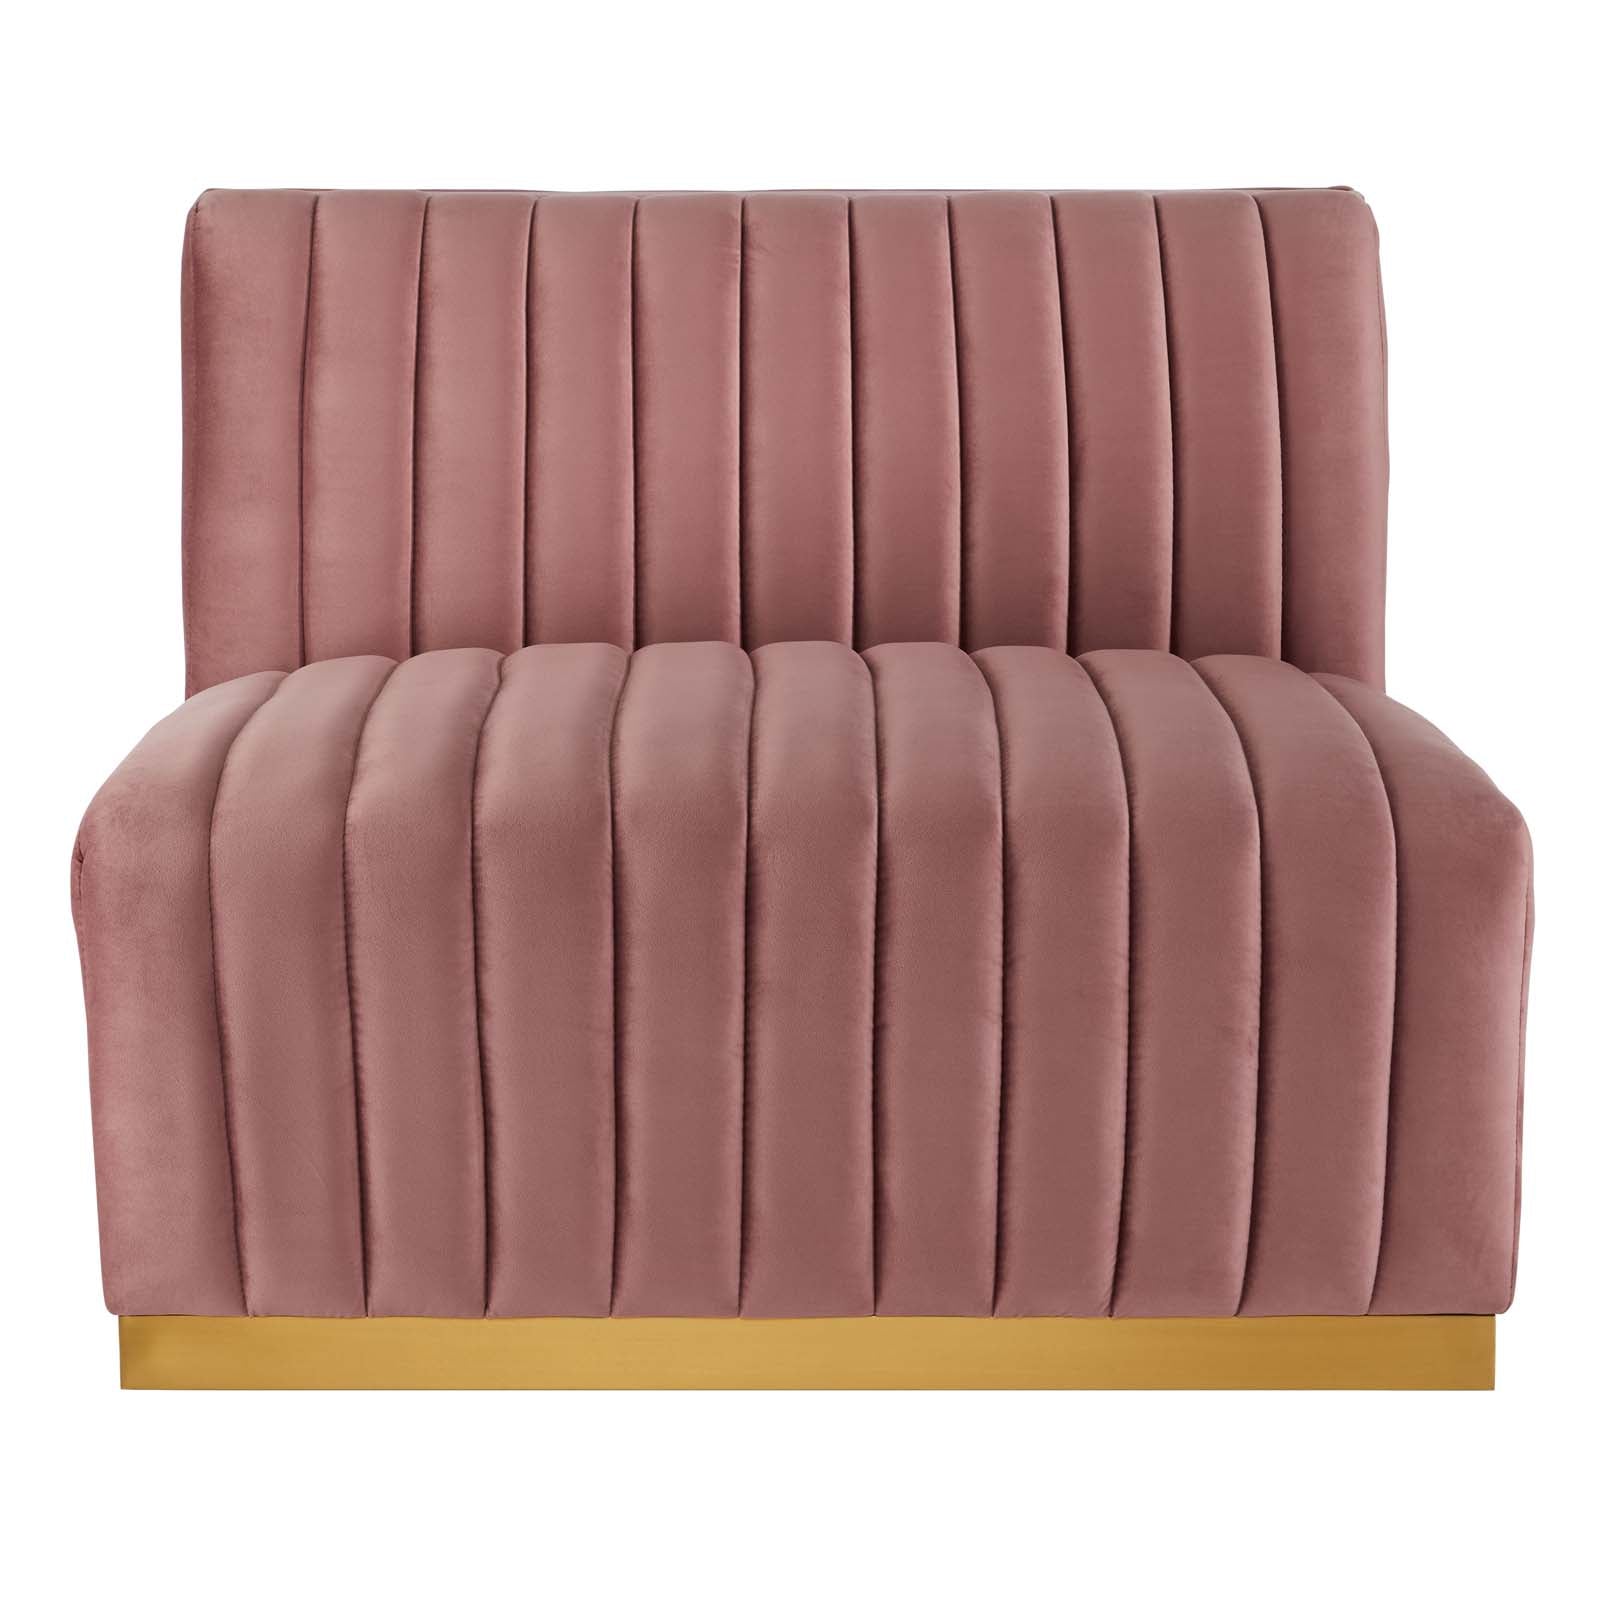 Modway Sectional Sofas - Conjure Channel Tufted Performance Velvet 4 Piece Sectional Gold | Dusty Rose